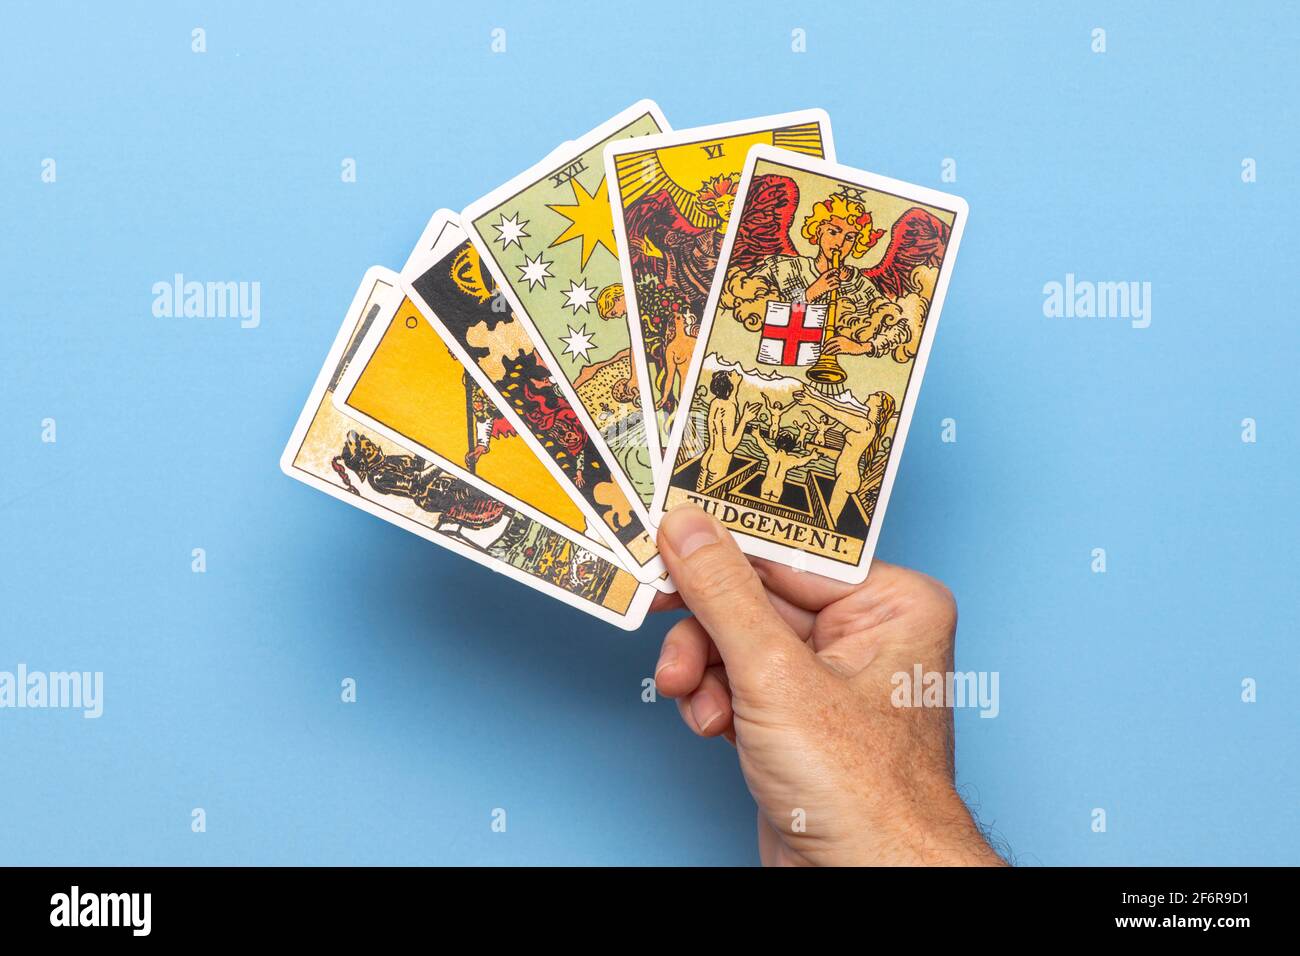 Hand holding tarot cards with the Judgement card upmost. Stock Photo